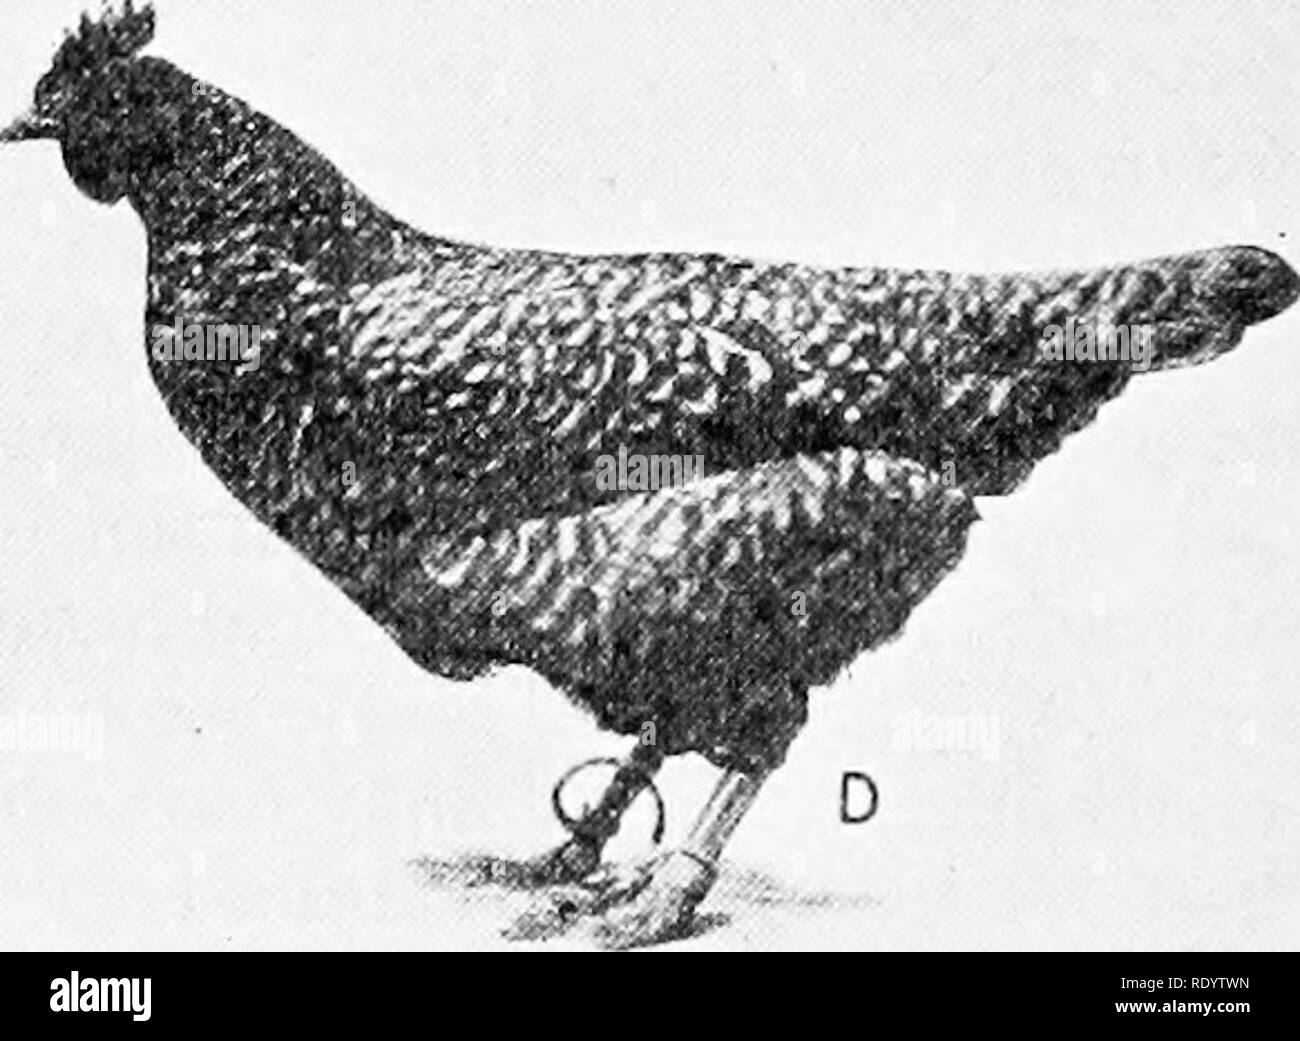 . Genetics in relation to agriculture. Livestock; Heredity; Variation (Biology); Plant breeding. Fig. 191.—EcsiiUs of erossing White Plymouth Rock and White Leghorn. A, Pid', White Leghorn; C, Pi 9 , White Plymouth Rock; B, FicT, showing a little flecking of black and a barred tail feather; D,Fi&lt;^ , type of barred birds obtained in Fi. (After Hadley.) The most important kind of Mendelian work is that which leads to some definite anal3rsis of the factor complex characteristic of a given breed. As an illustration of such investigations we have Hadlej^'s analysis of the genetic constitution of Stock Photo